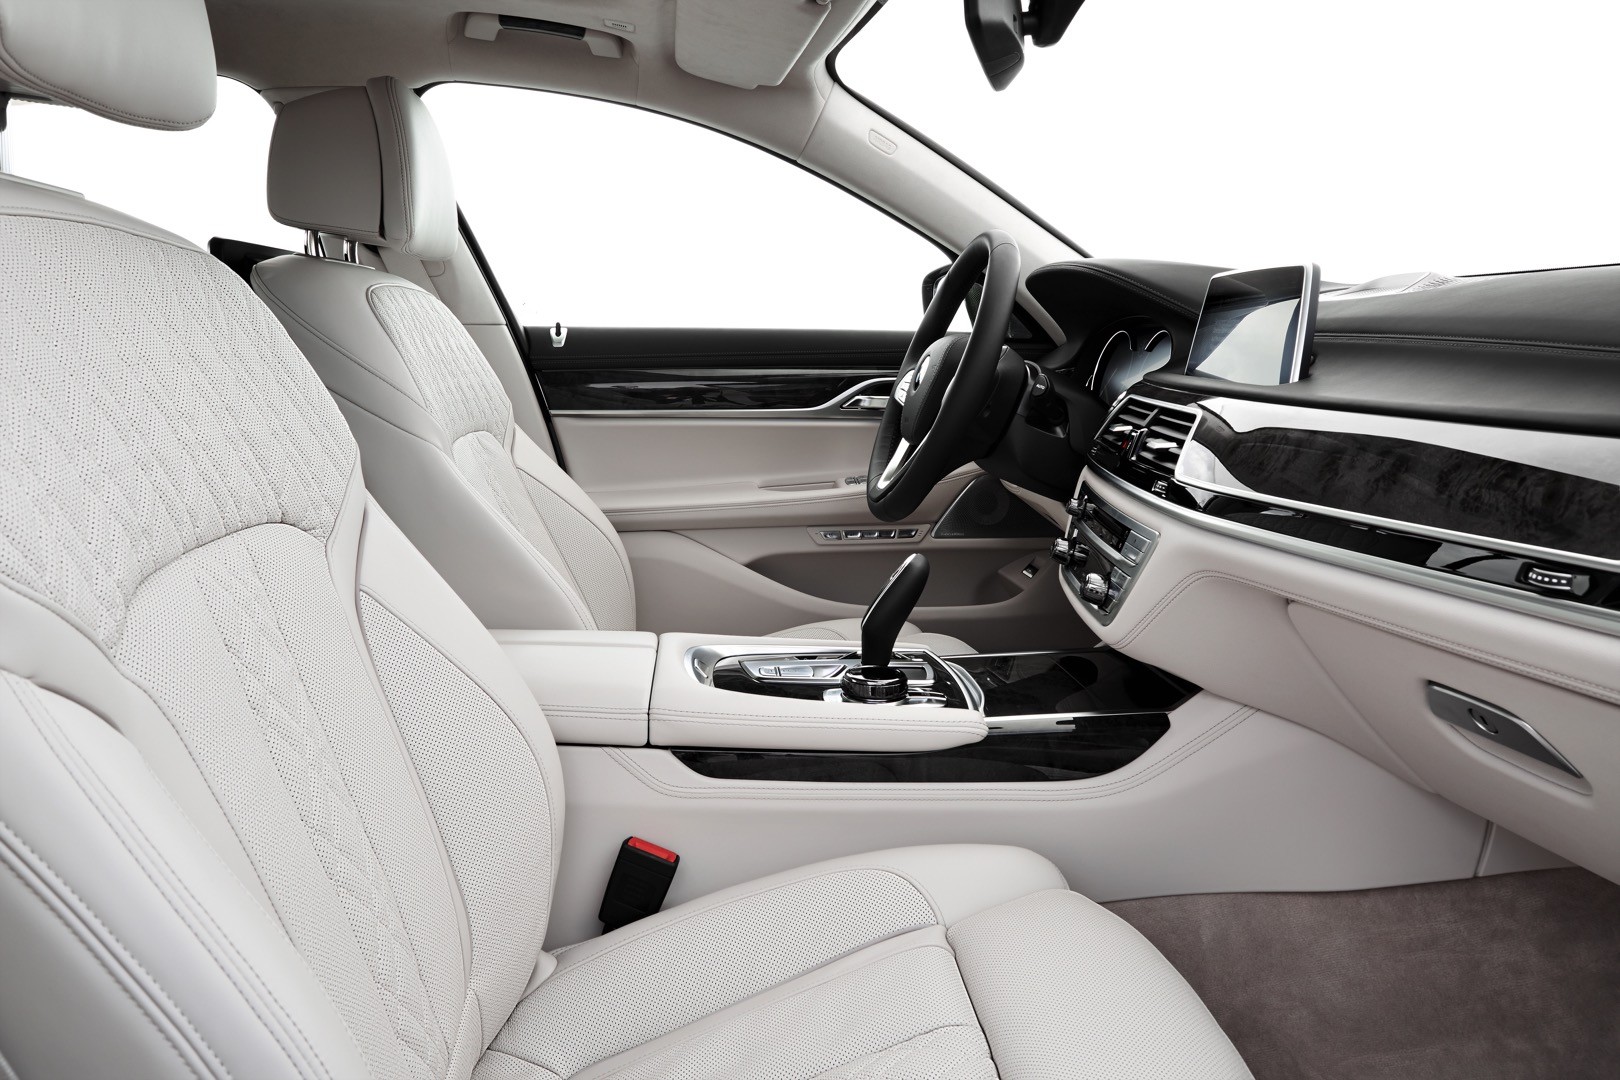 2016-bmw-7-series-finally-officially-unveiled-the-good-stuffs-inside-photo-gallery_35